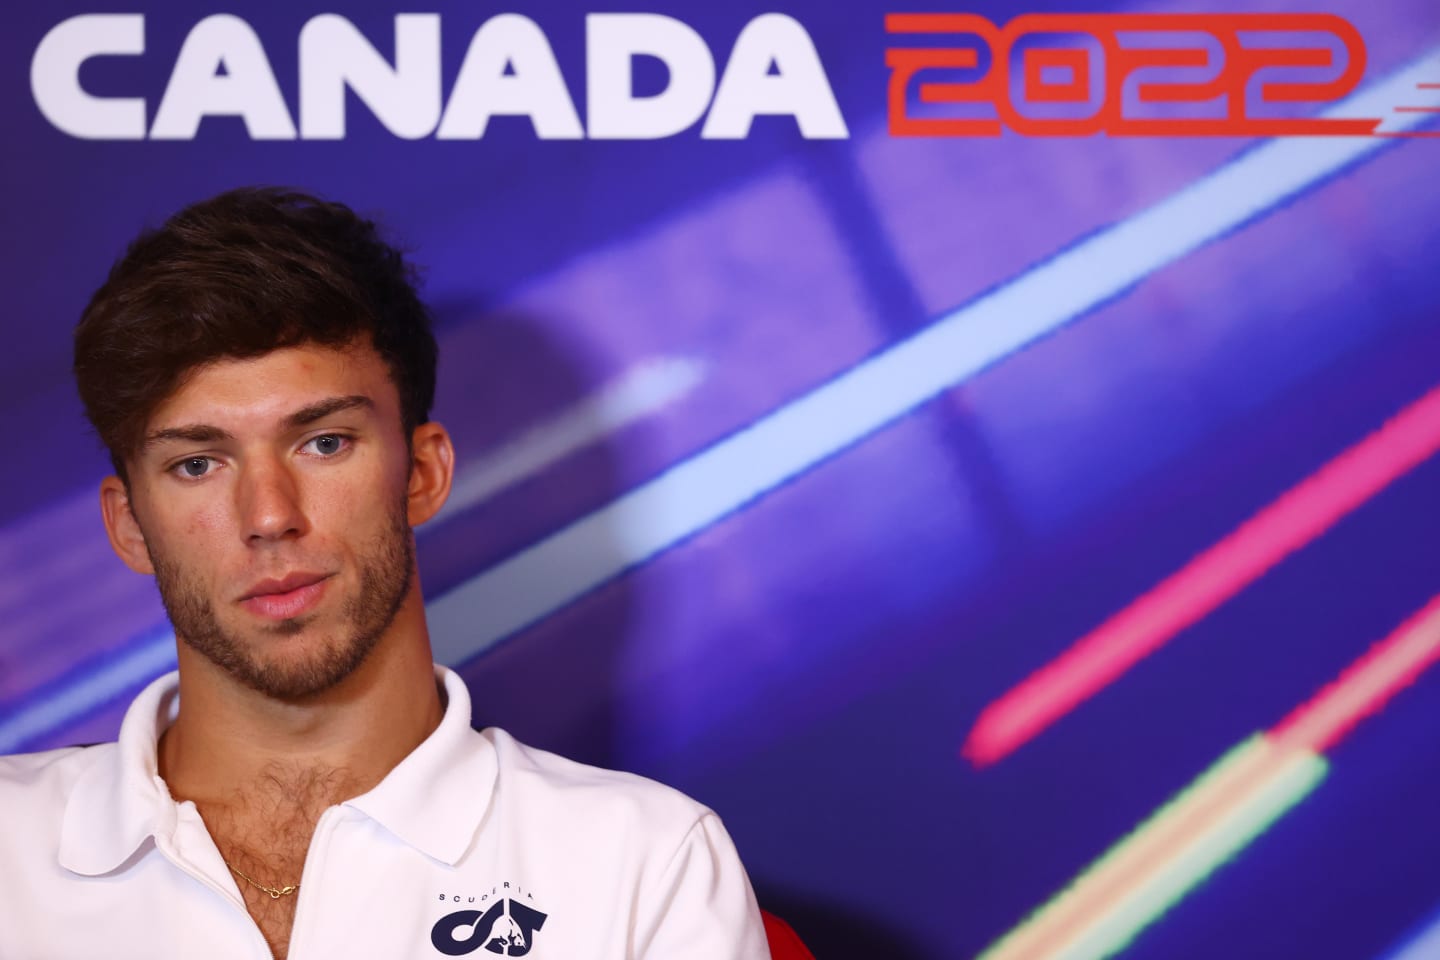 MONTREAL, QUEBEC - JUNE 17: Pierre Gasly of France and Scuderia AlphaTauri looks on in the Drivers Press Conference prior to practice ahead of the F1 Grand Prix of Canada at Circuit Gilles Villeneuve on June 17, 2022 in Montreal, Quebec. (Photo by Dan Istitene/Getty Images)